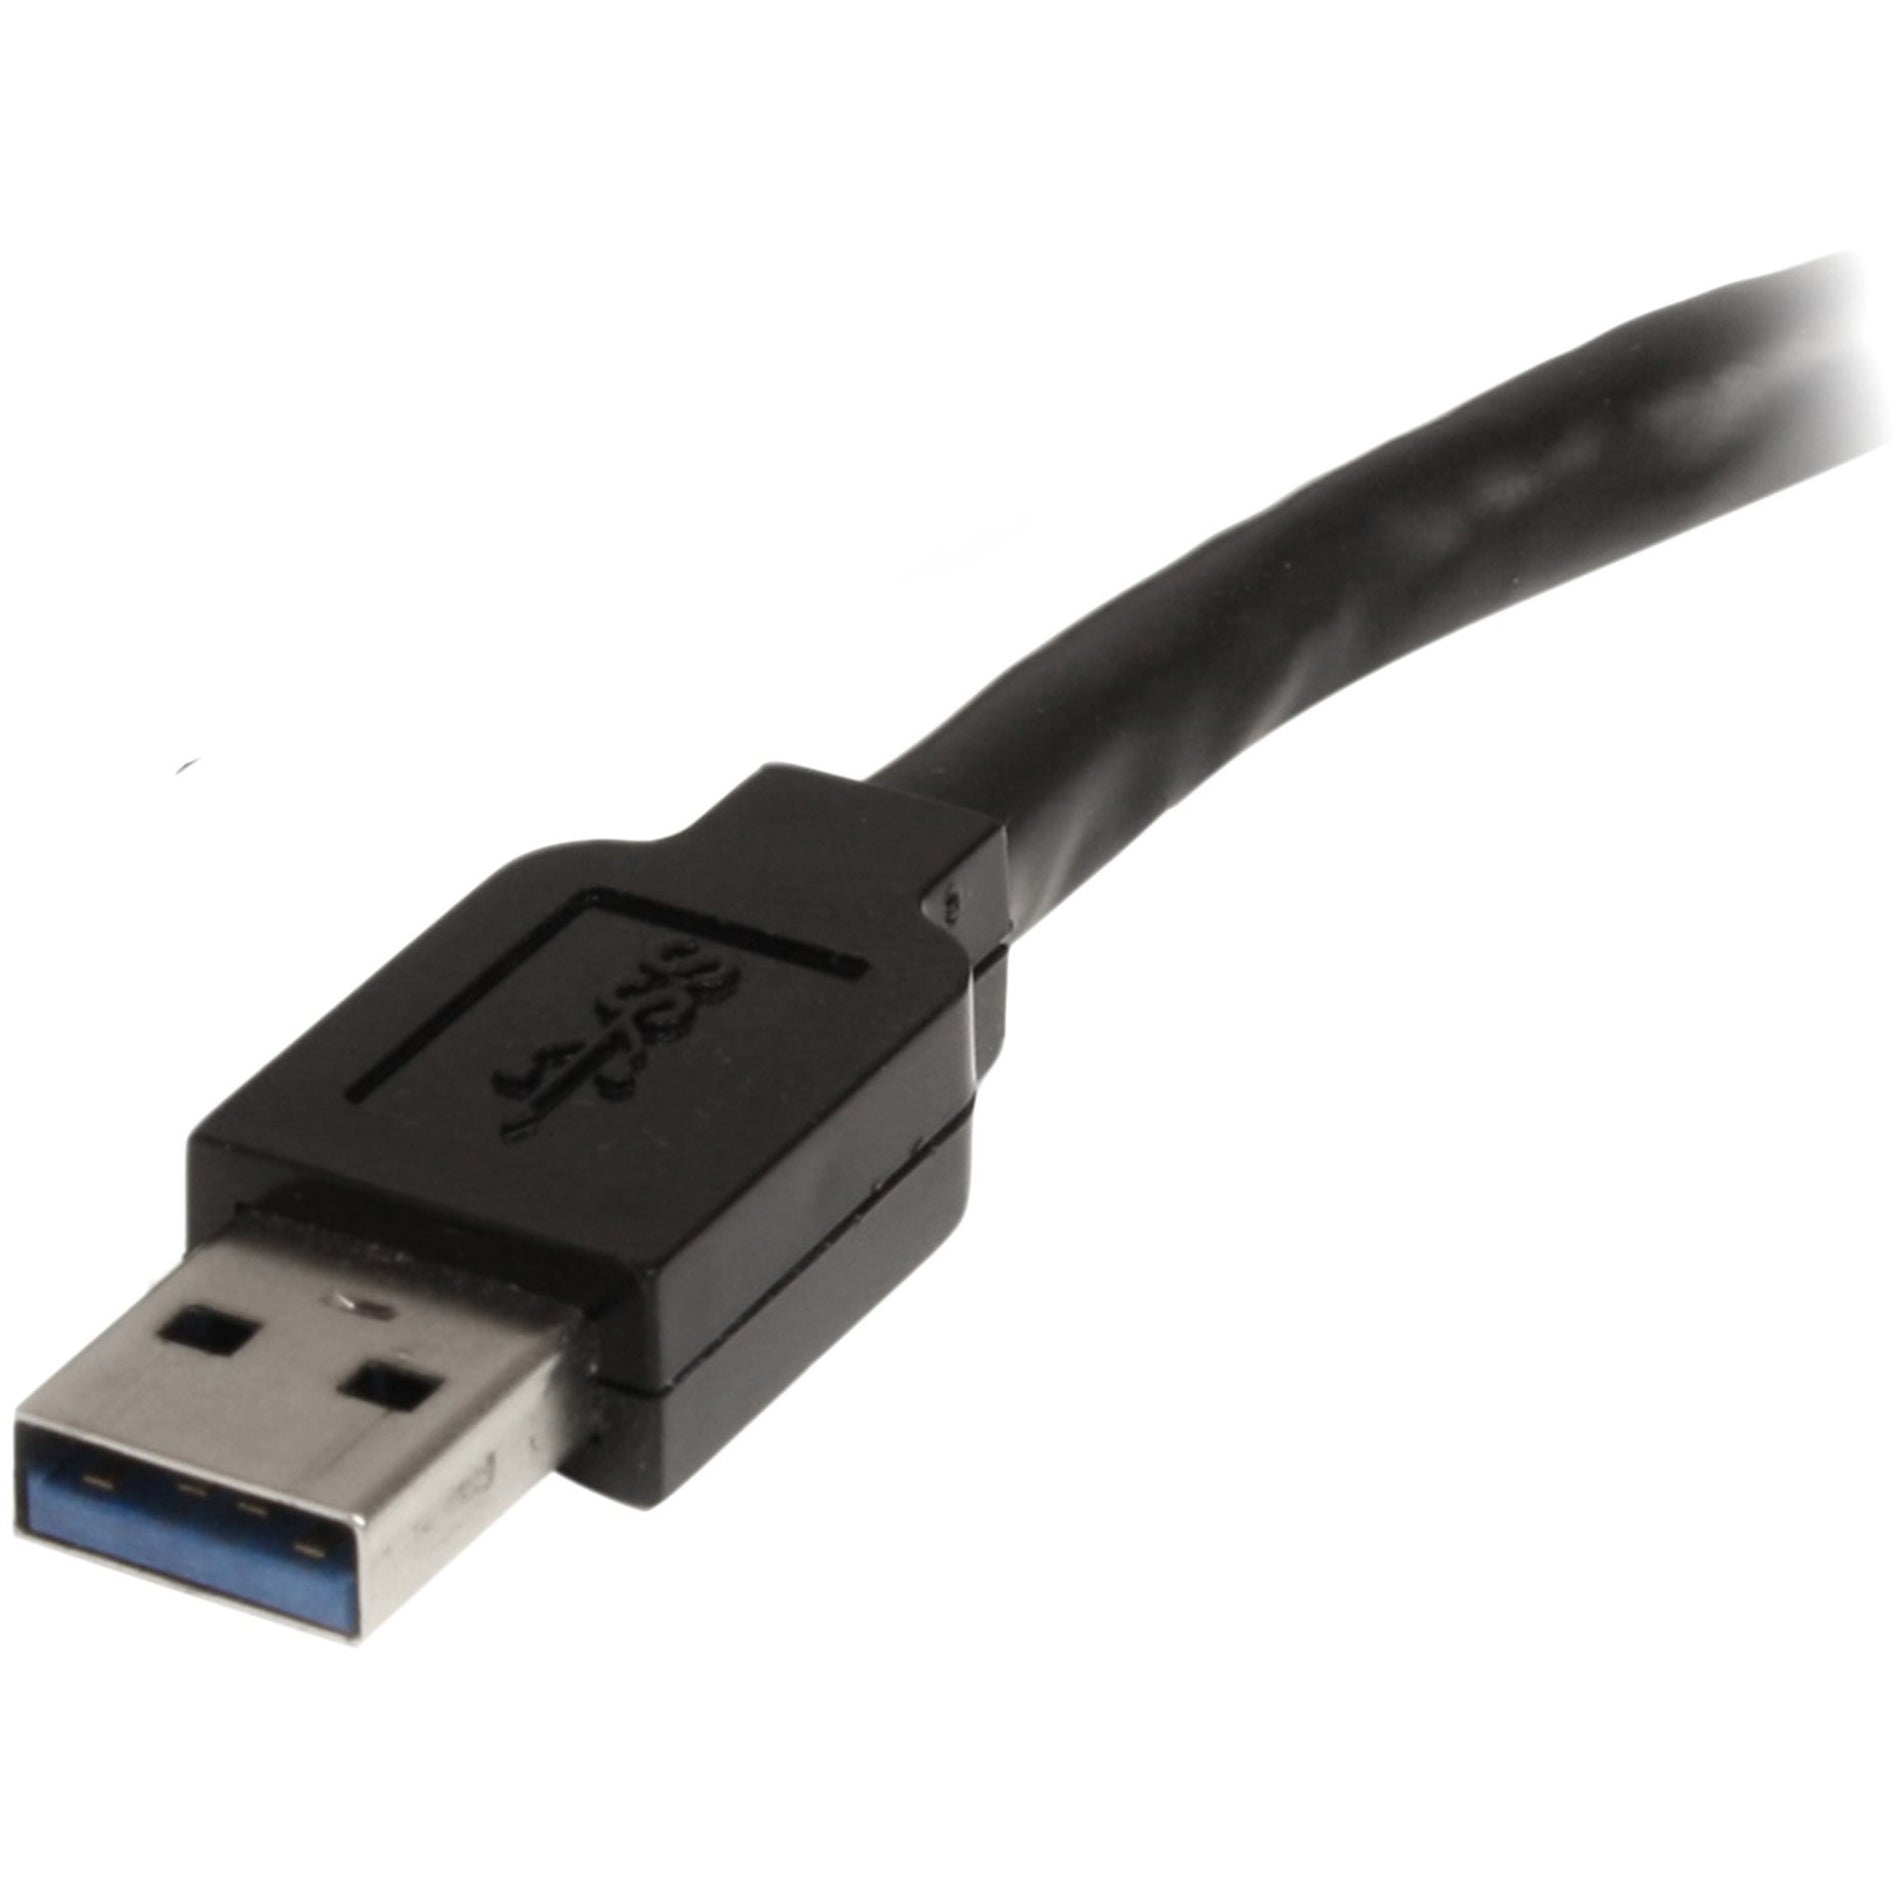 StarTech.com USB3AAEXT5M 5m USB 3.0 Active Extension Cable - M/F, Plug & Play, 16.40 ft Data Transfer Cable